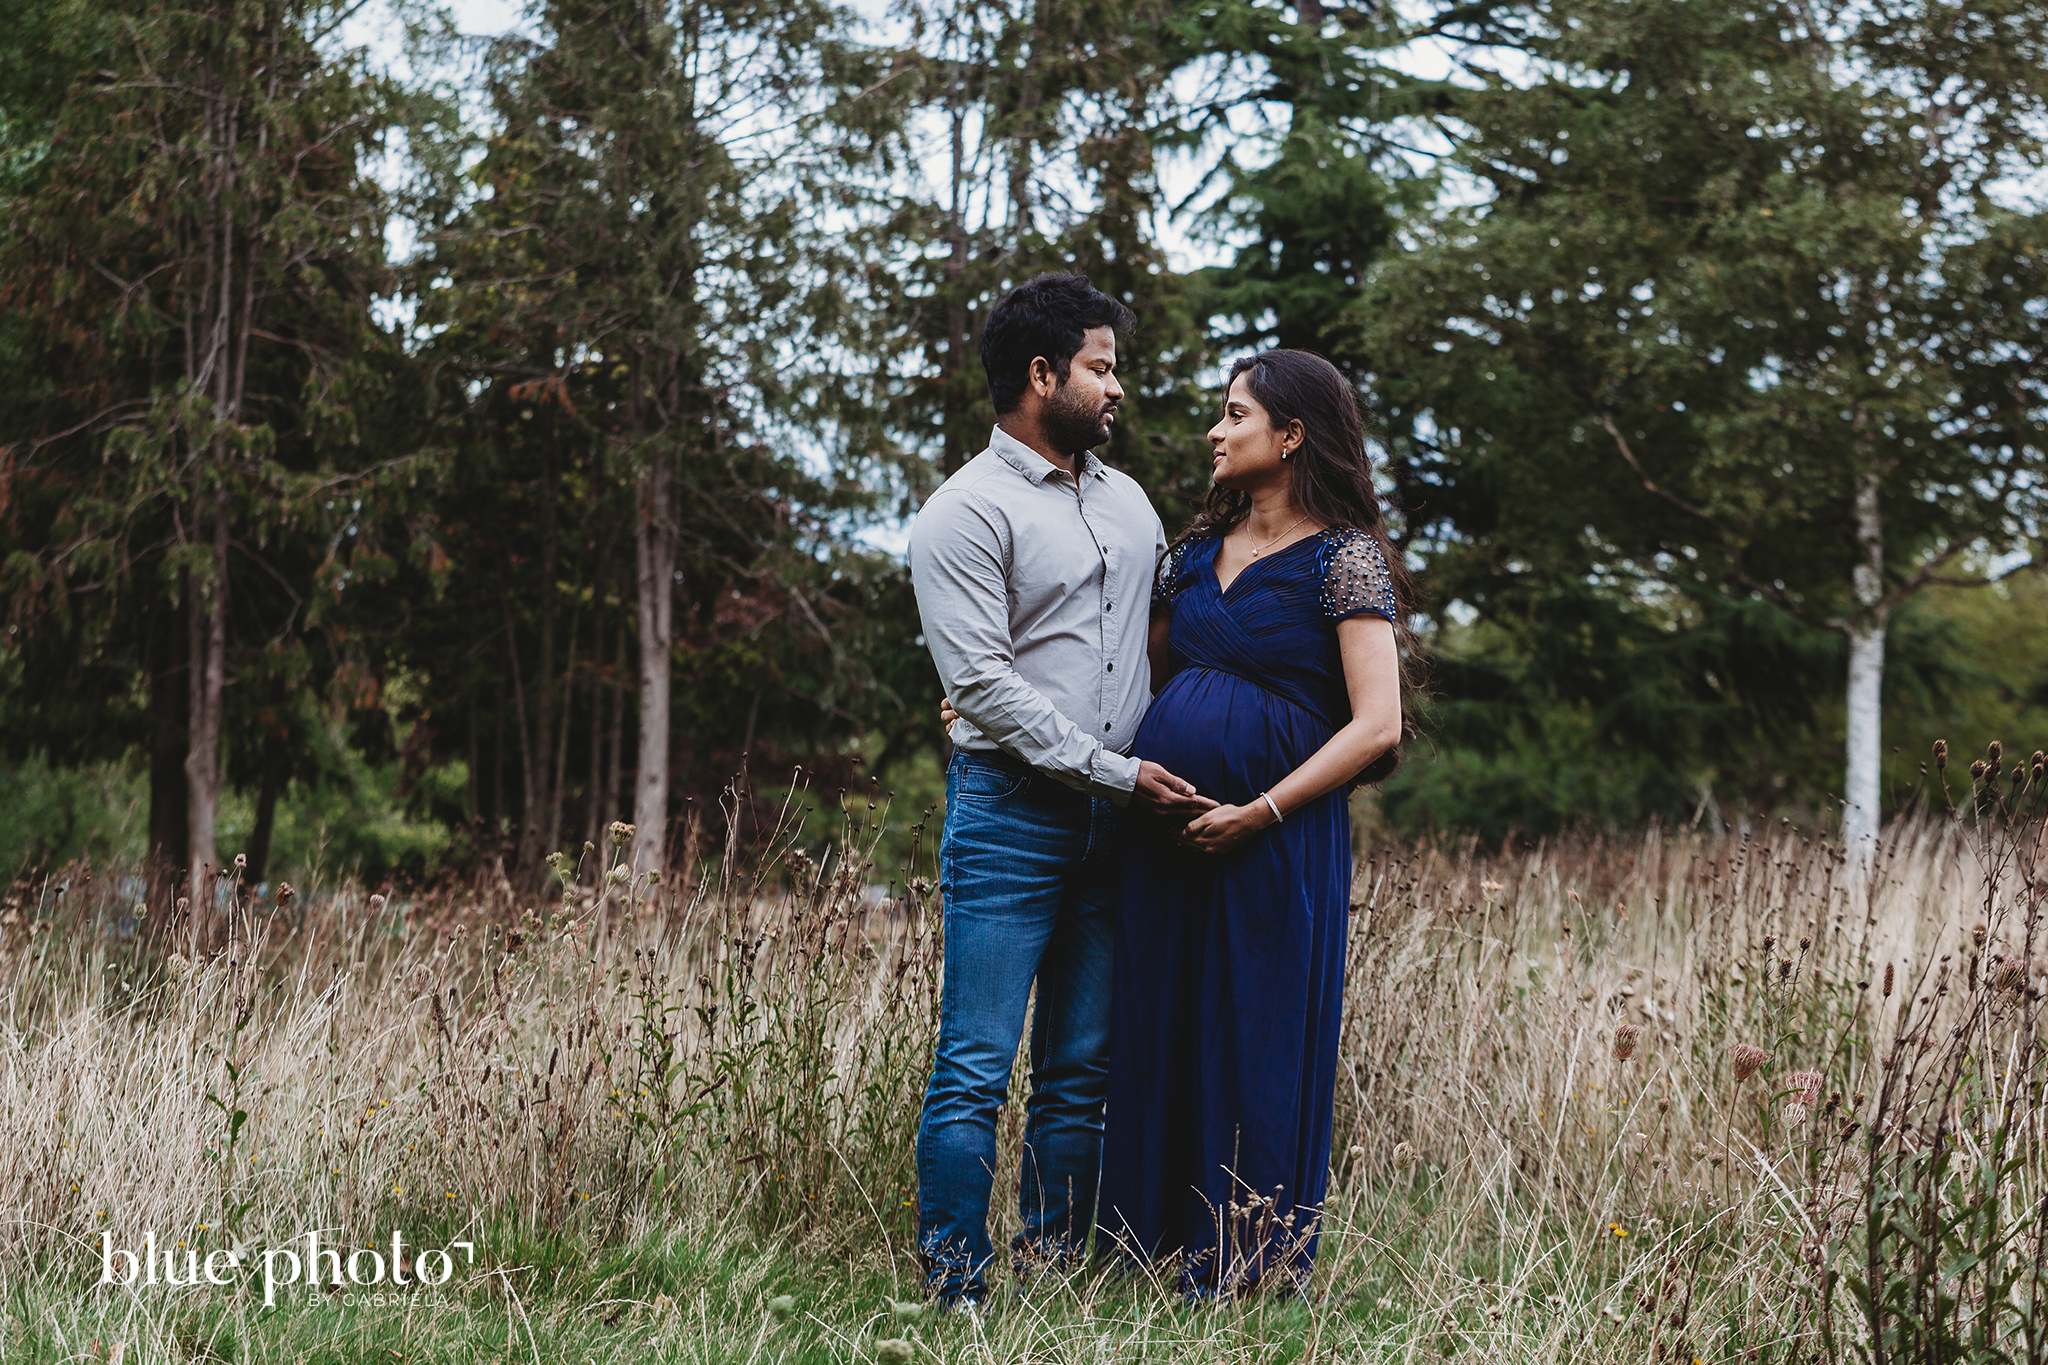 Socially distanced maternity session in West London. The couple is looking at each other and smiling. 